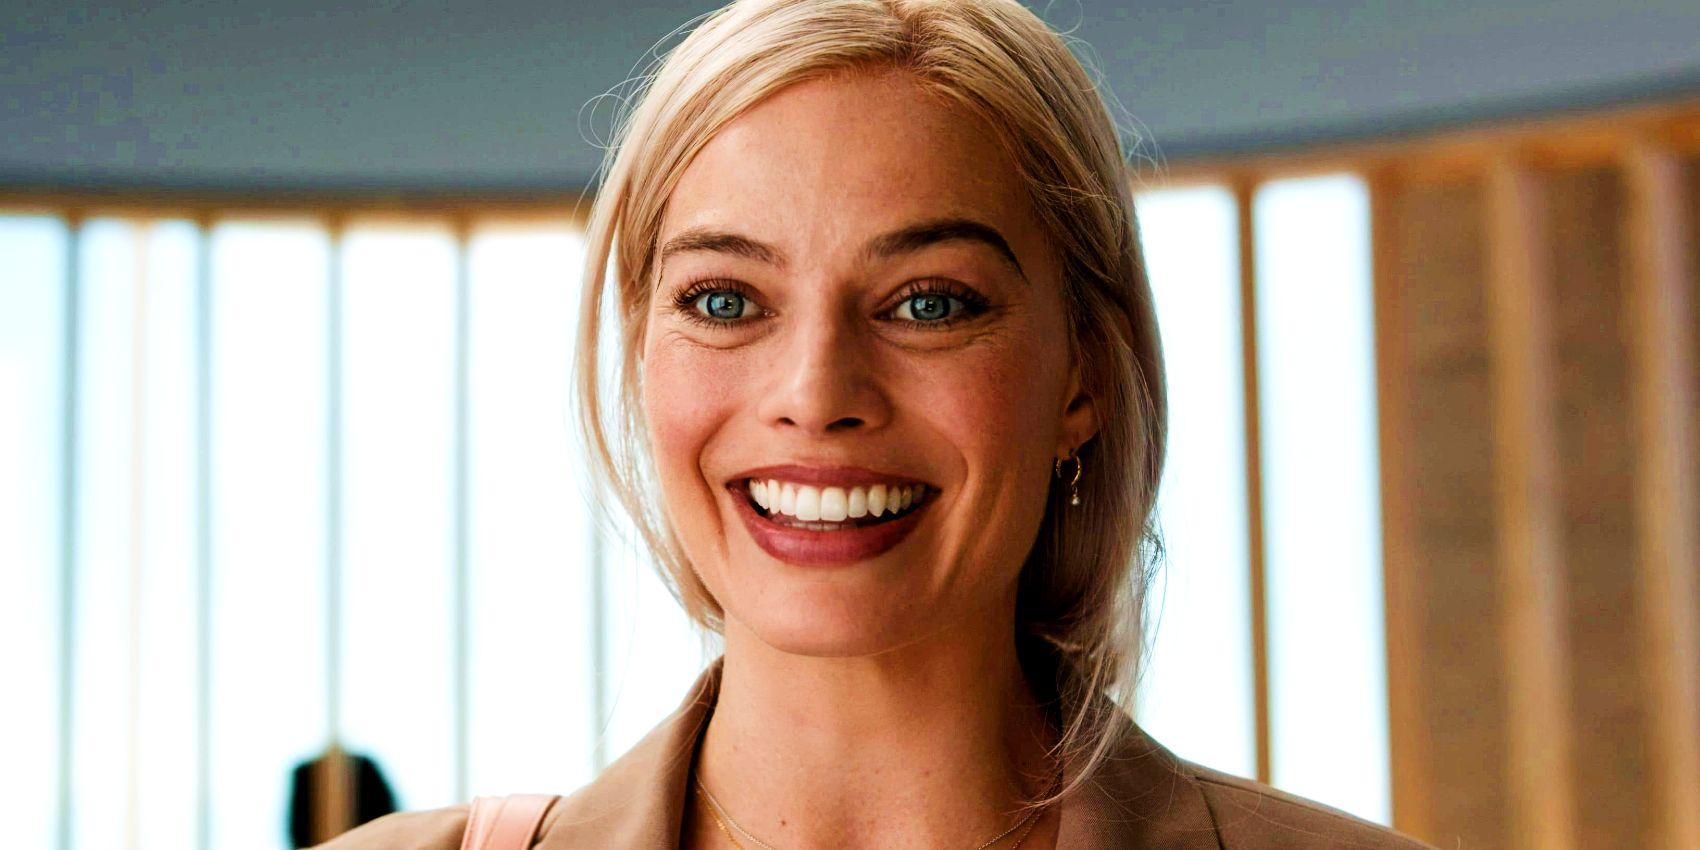 Margot Robbie as Stereotypical Barbie smiling in the doctor's office at the end of the Barbie movie.